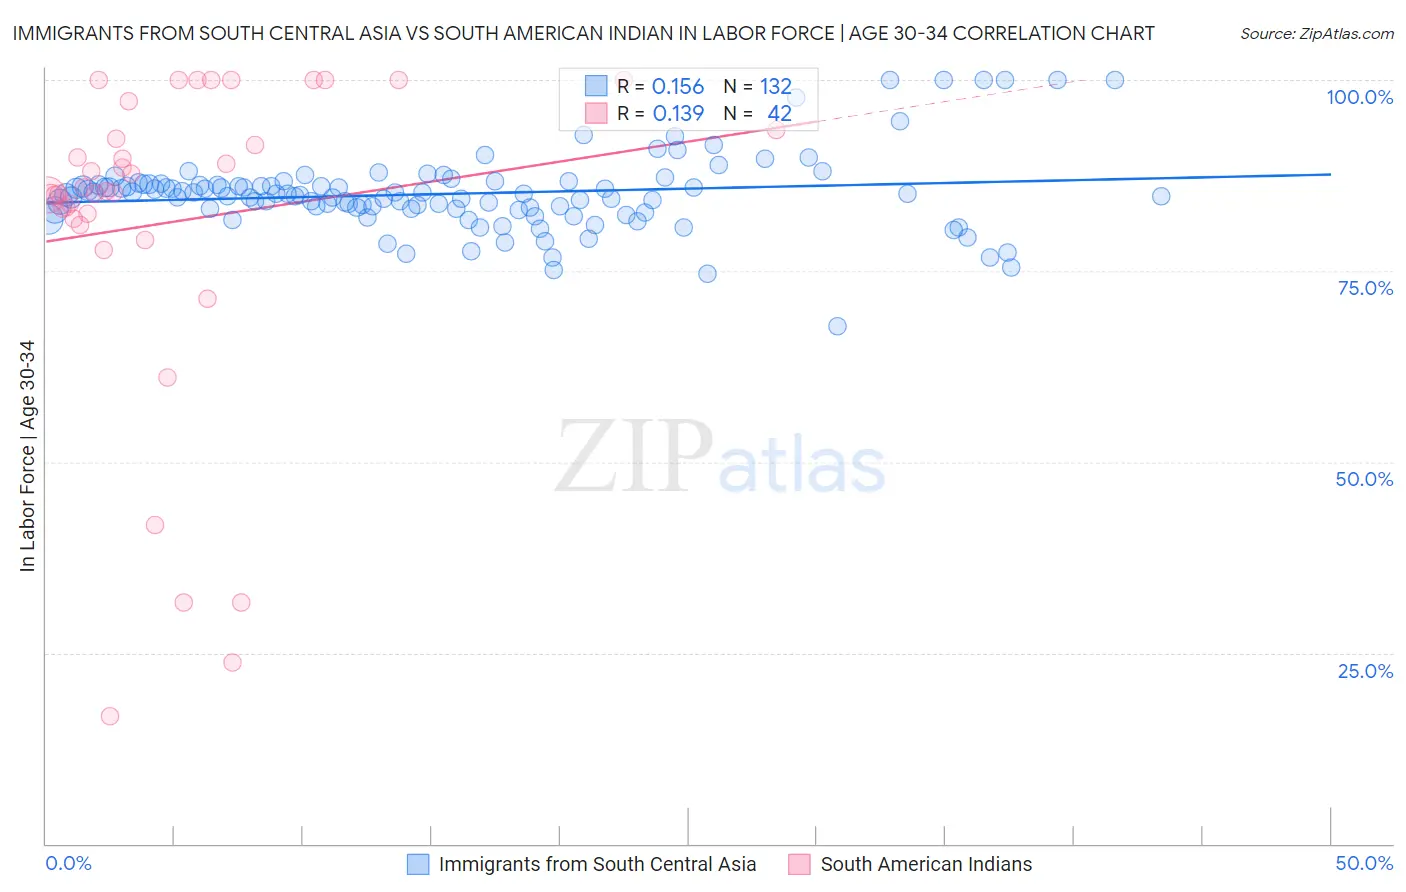 Immigrants from South Central Asia vs South American Indian In Labor Force | Age 30-34